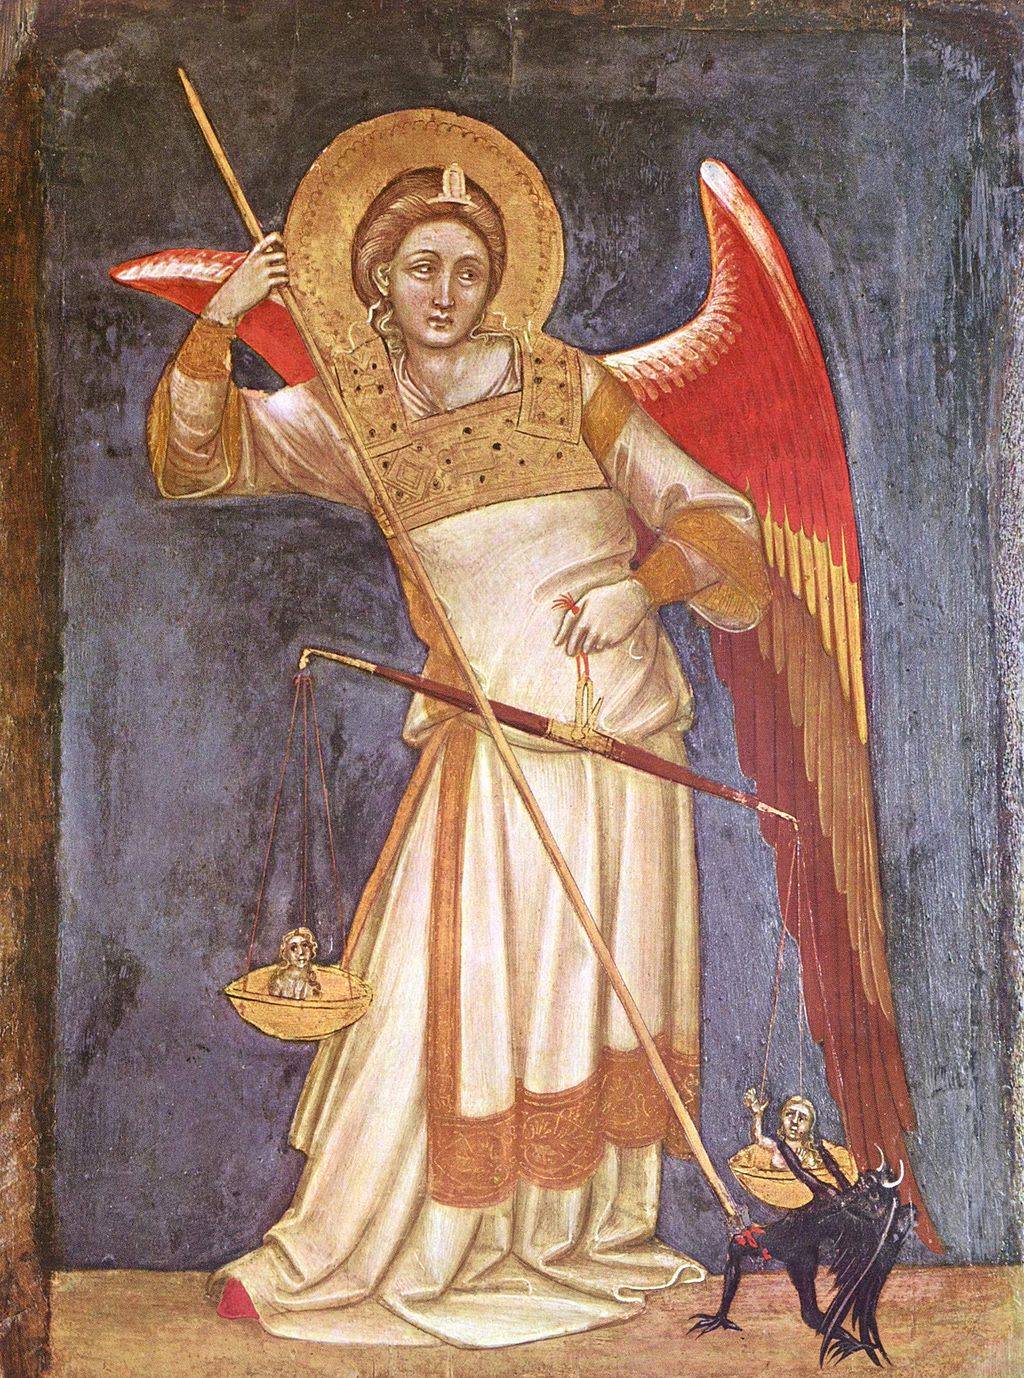 St Michael Spearing Devil while Weighing Souls by Guariento